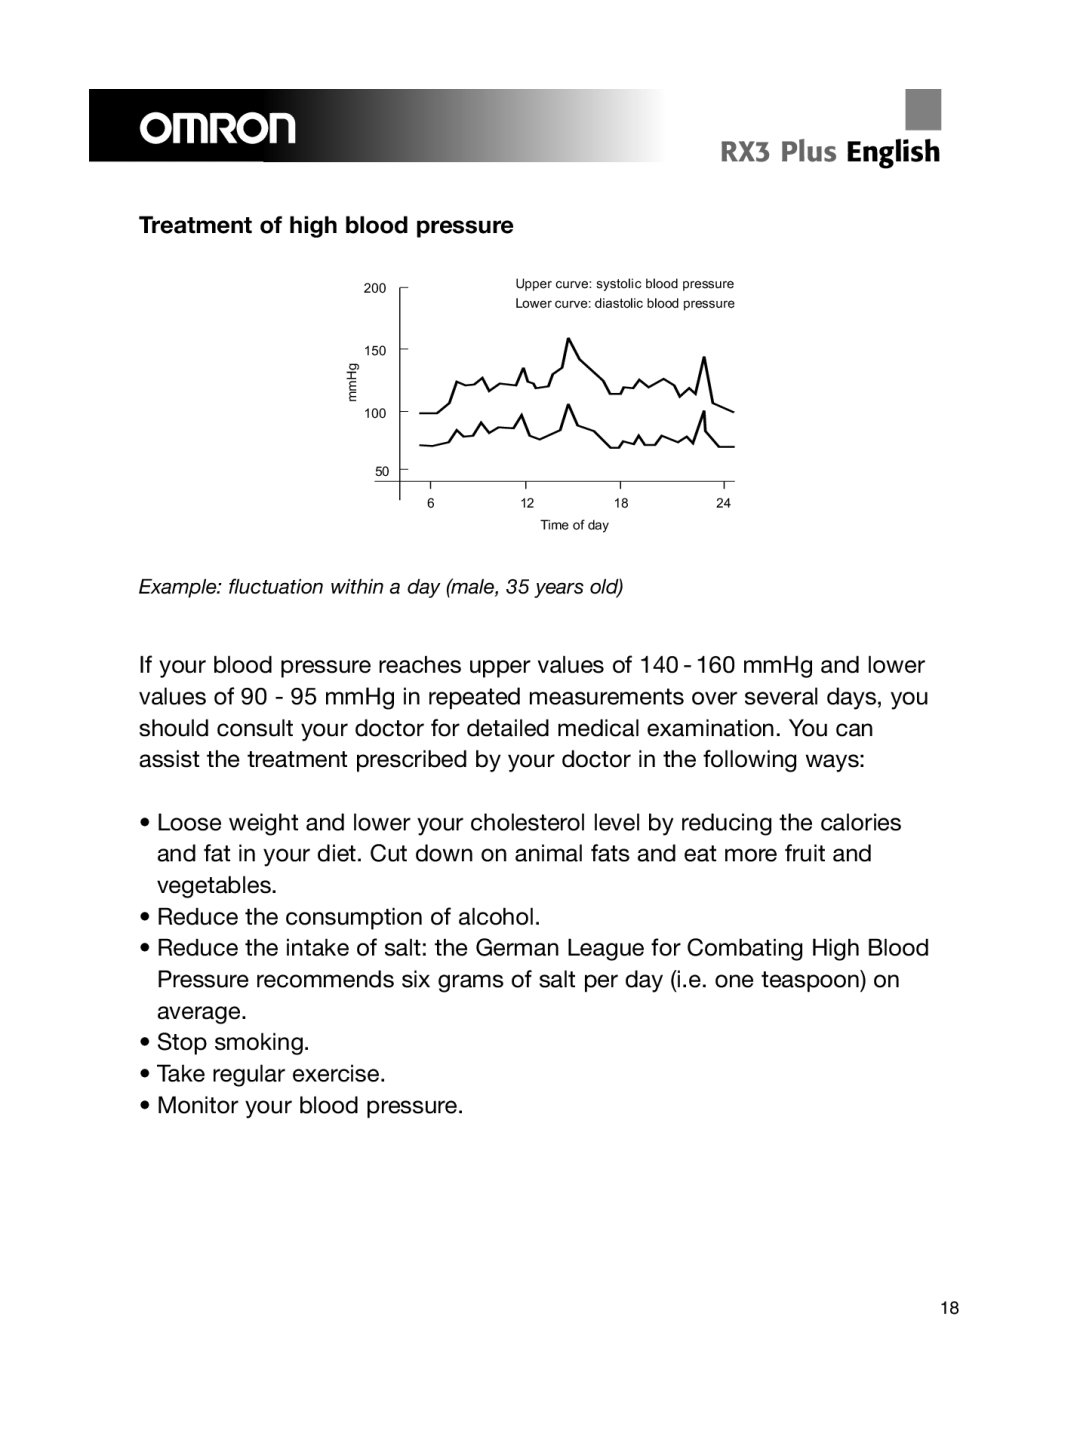 Omron Healthcare RX3 manual Treatment of high blood pressure, Example fluctuation within a day male, 35 years old 